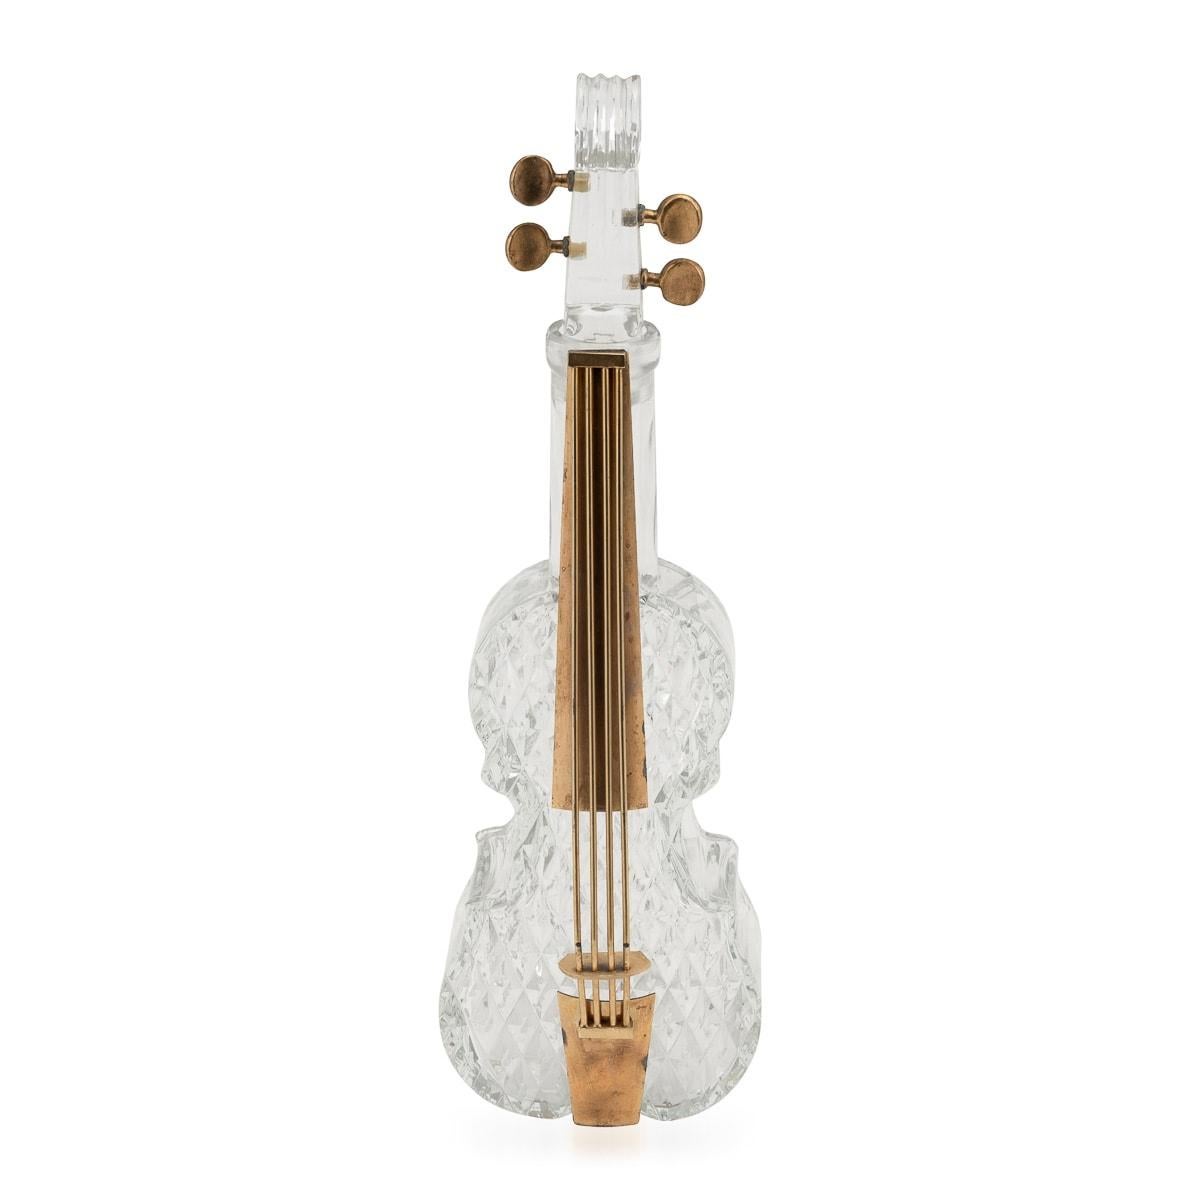 A charming novelty cut glass decanter, a musical ode in the shape of a double bass. Crafted with meticulous artistry in England during the mid to late 20th century, this distinctive decanter was formed using a glass mould, further adorned with